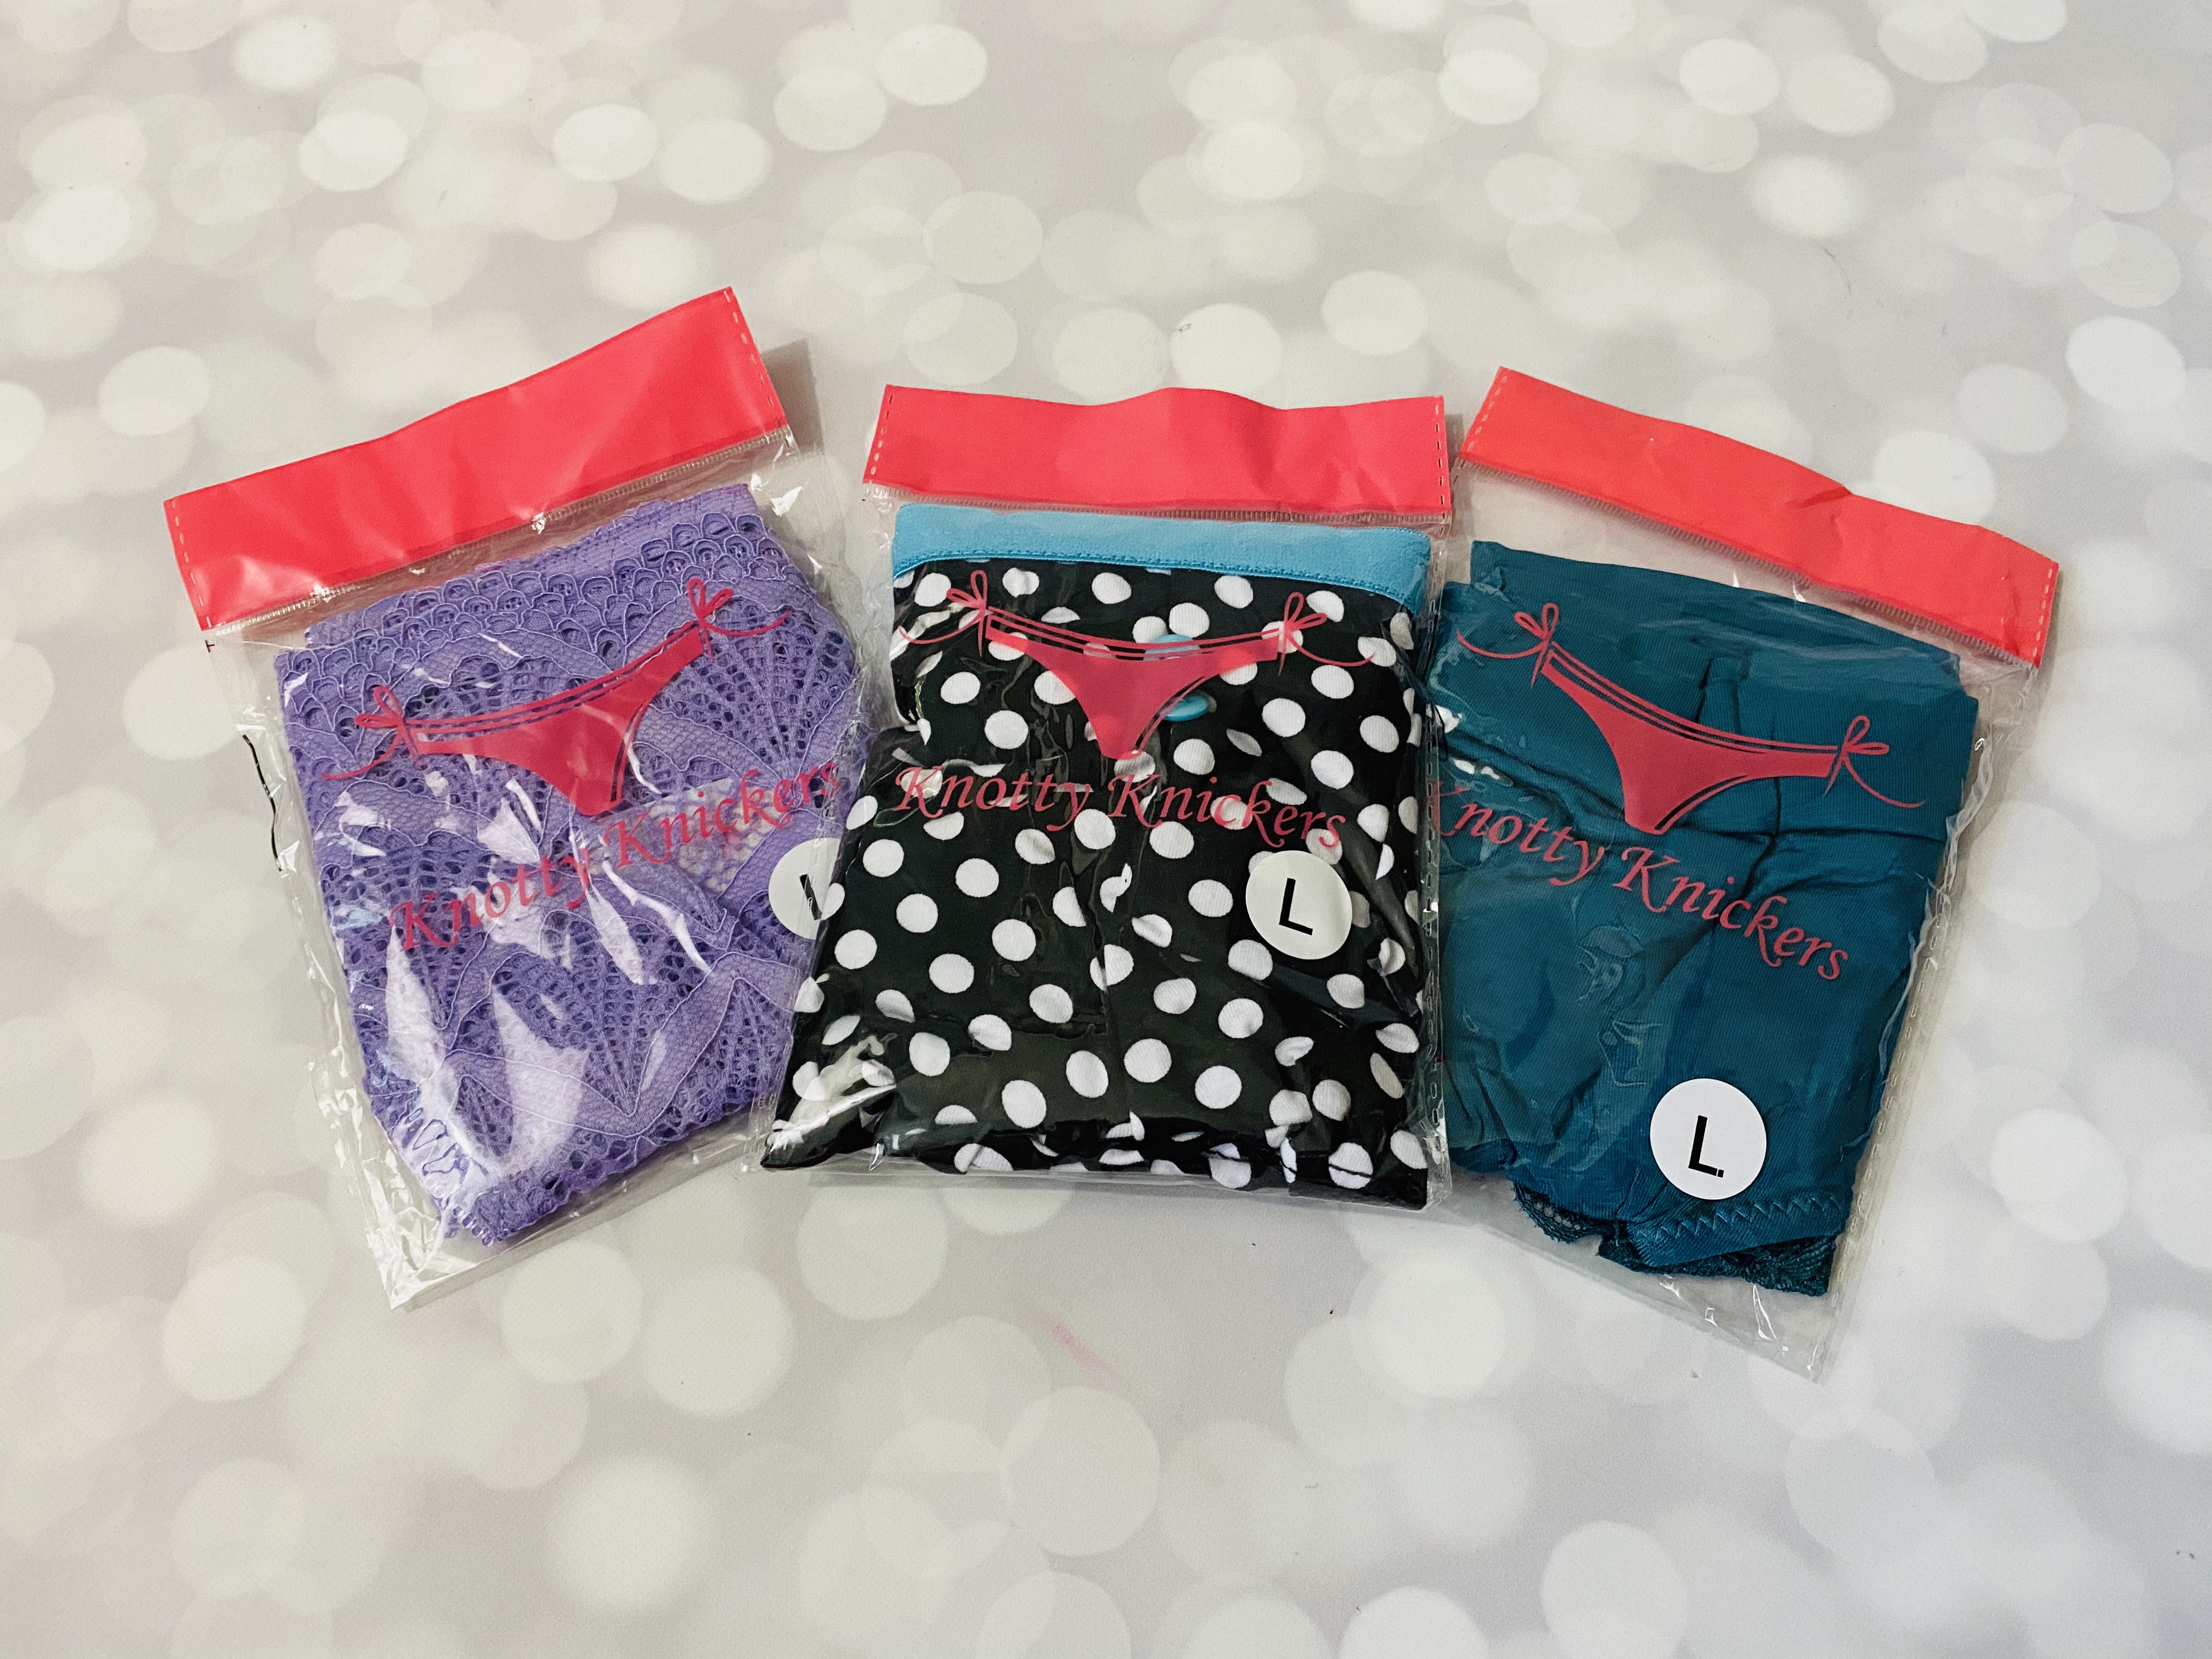 Knotty Knickers Subscription Box Review - June 2020